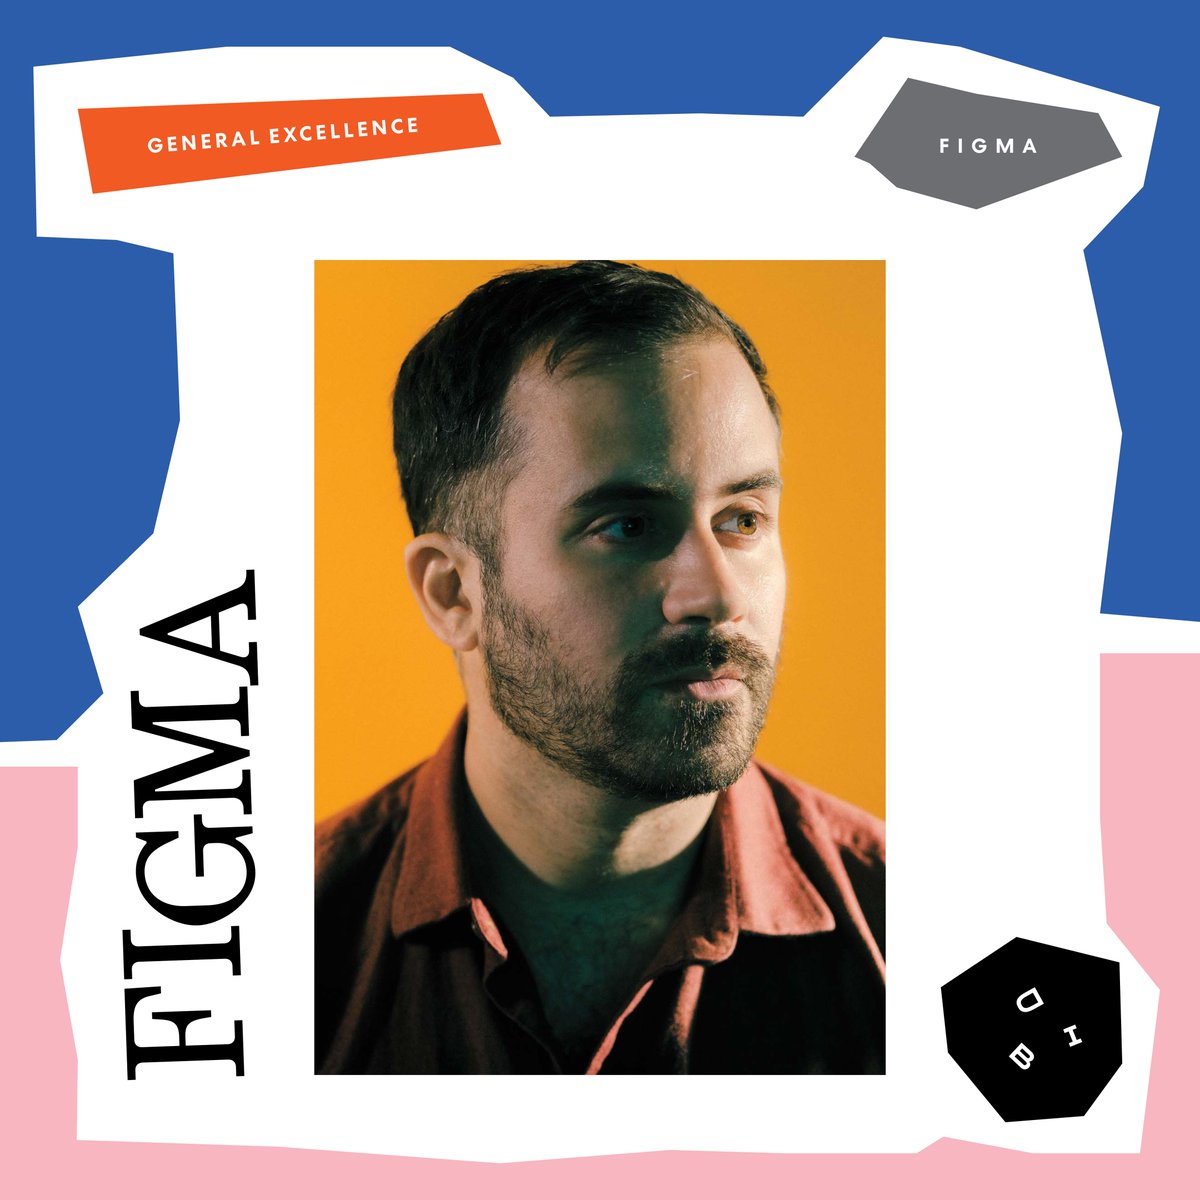 In an era of the distributed workforce, @figma —the General Excellence winner of the 2023 Innovation by Design Awards—has become a go-to platform for collaborative visual design. #FCDesignAwards bit.ly/44kUjAP